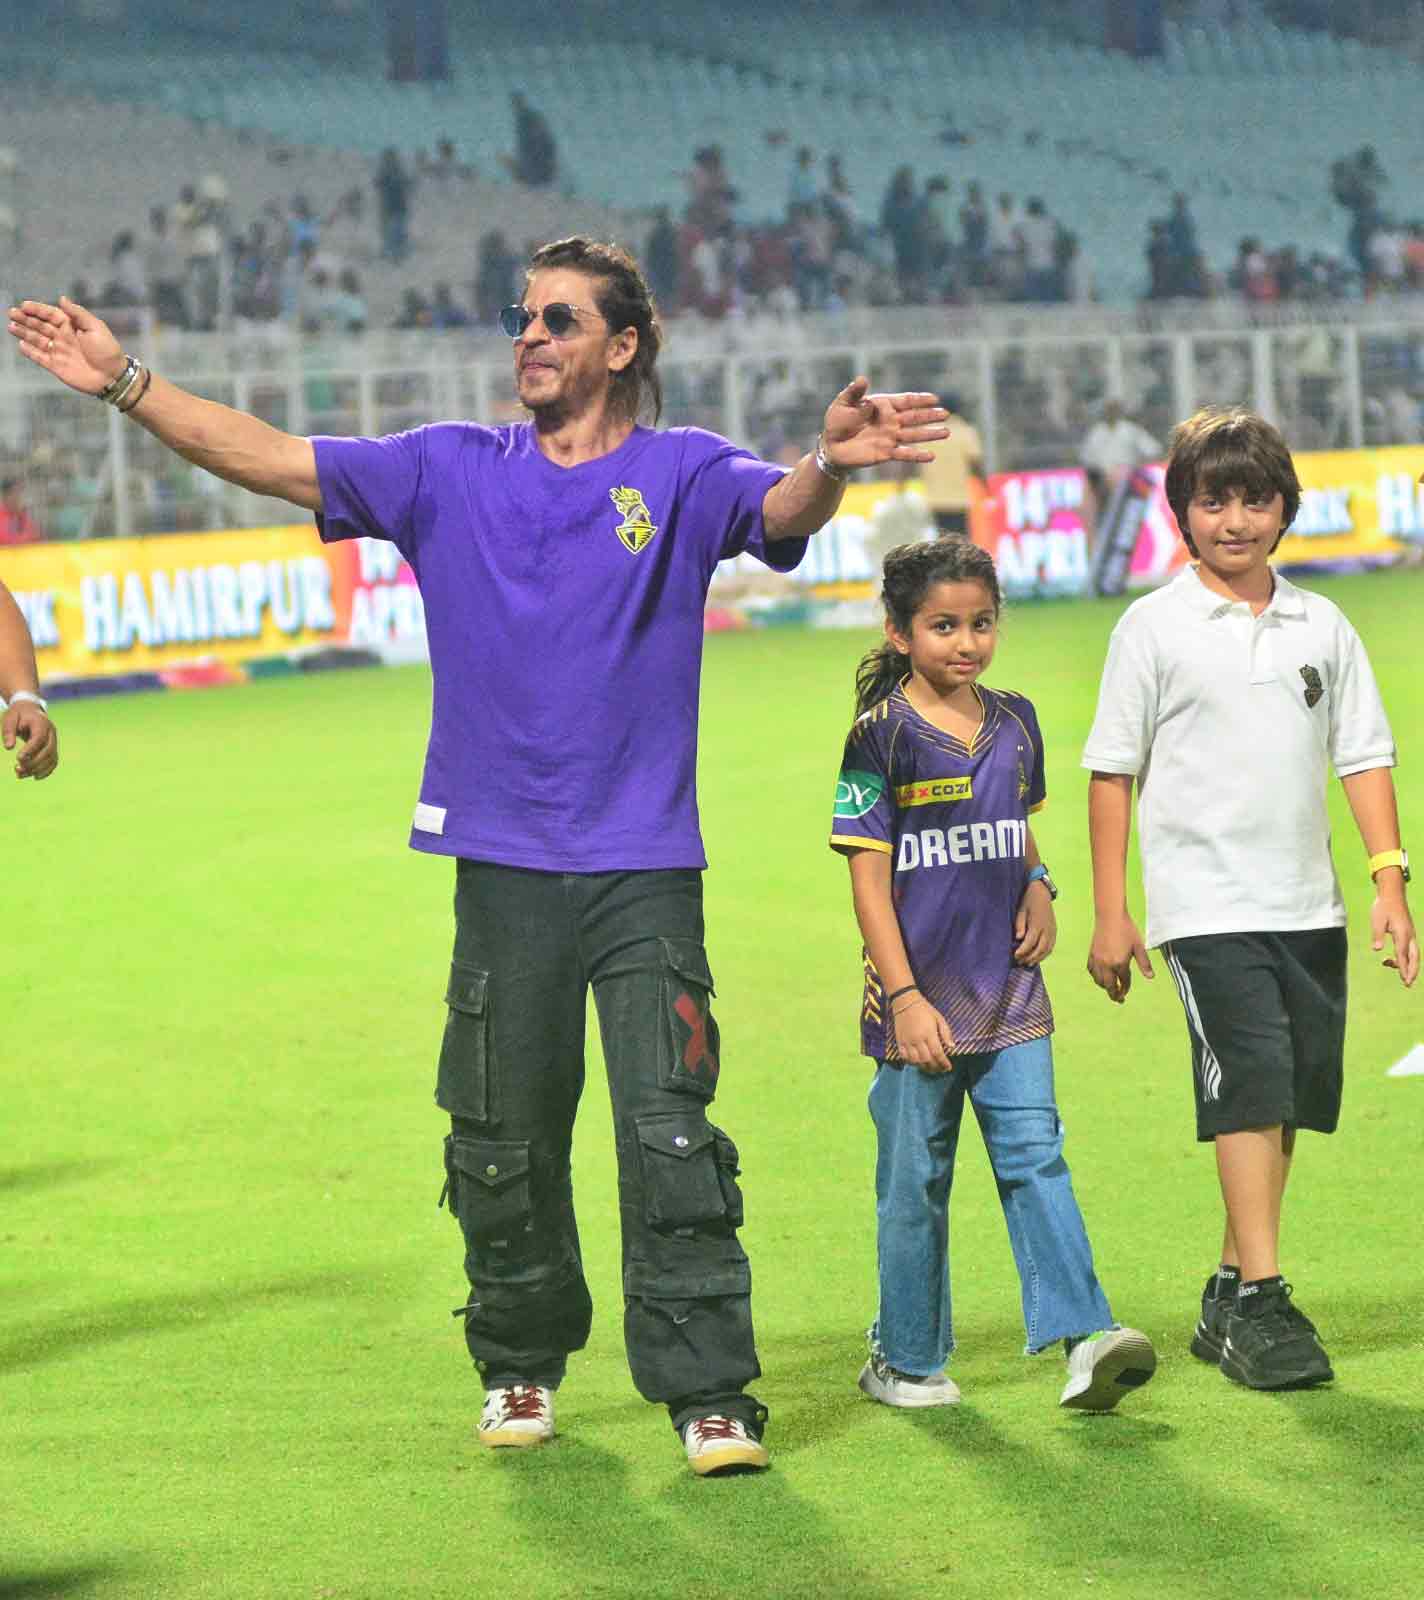 Shah Rukh waves to fans at the Eden Gardens after the Kolkata Knight Riders' victory against Lucknow Super Giants on Sunday afternoon